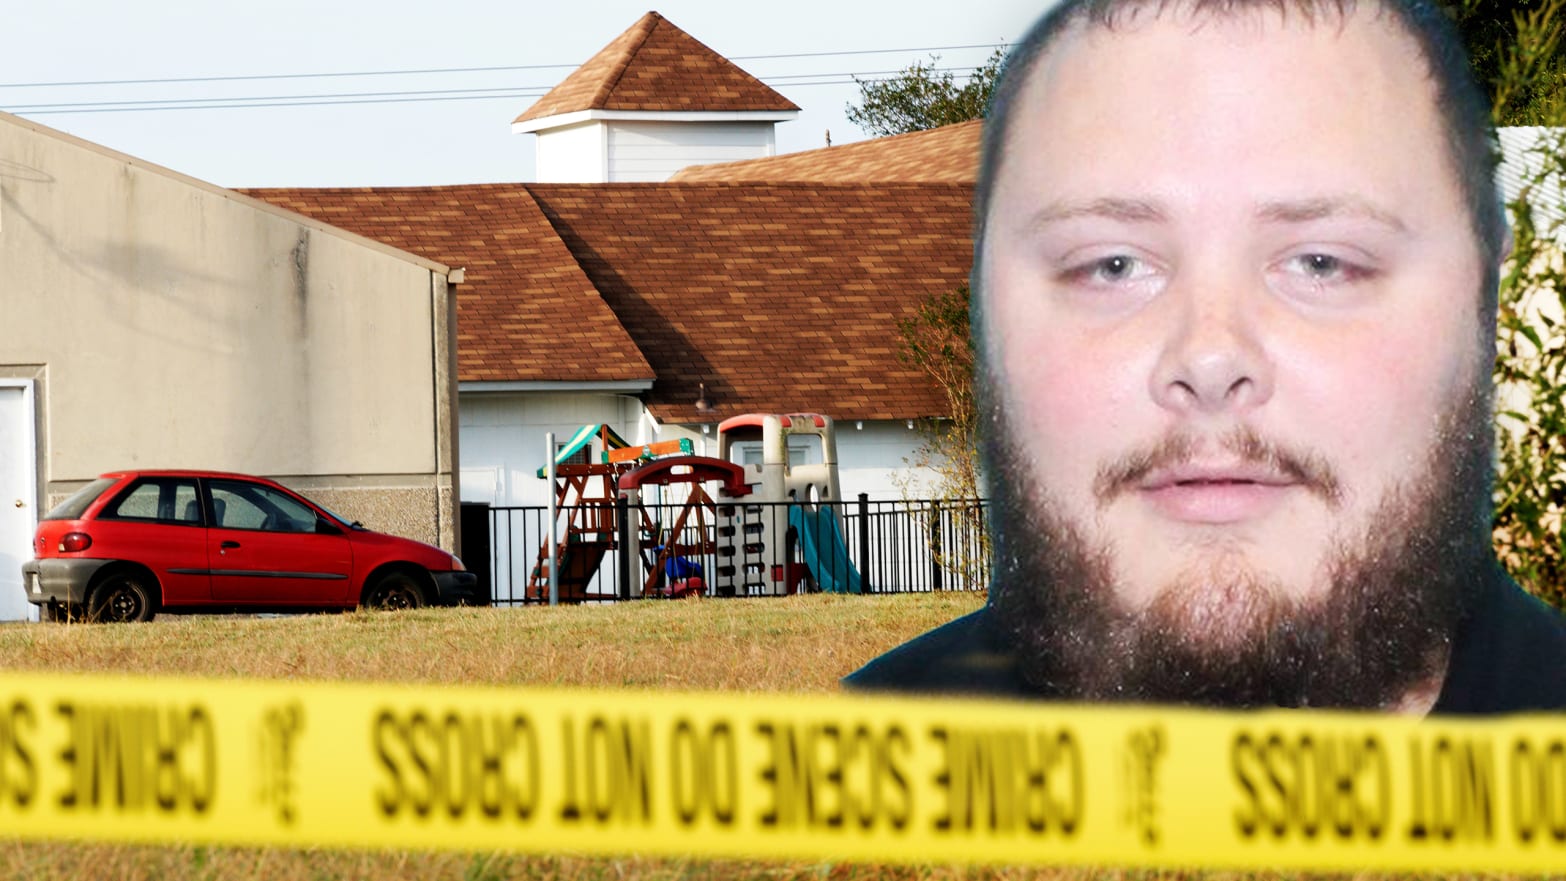 cameron hooks recommends Texas Church Shooting Uncut